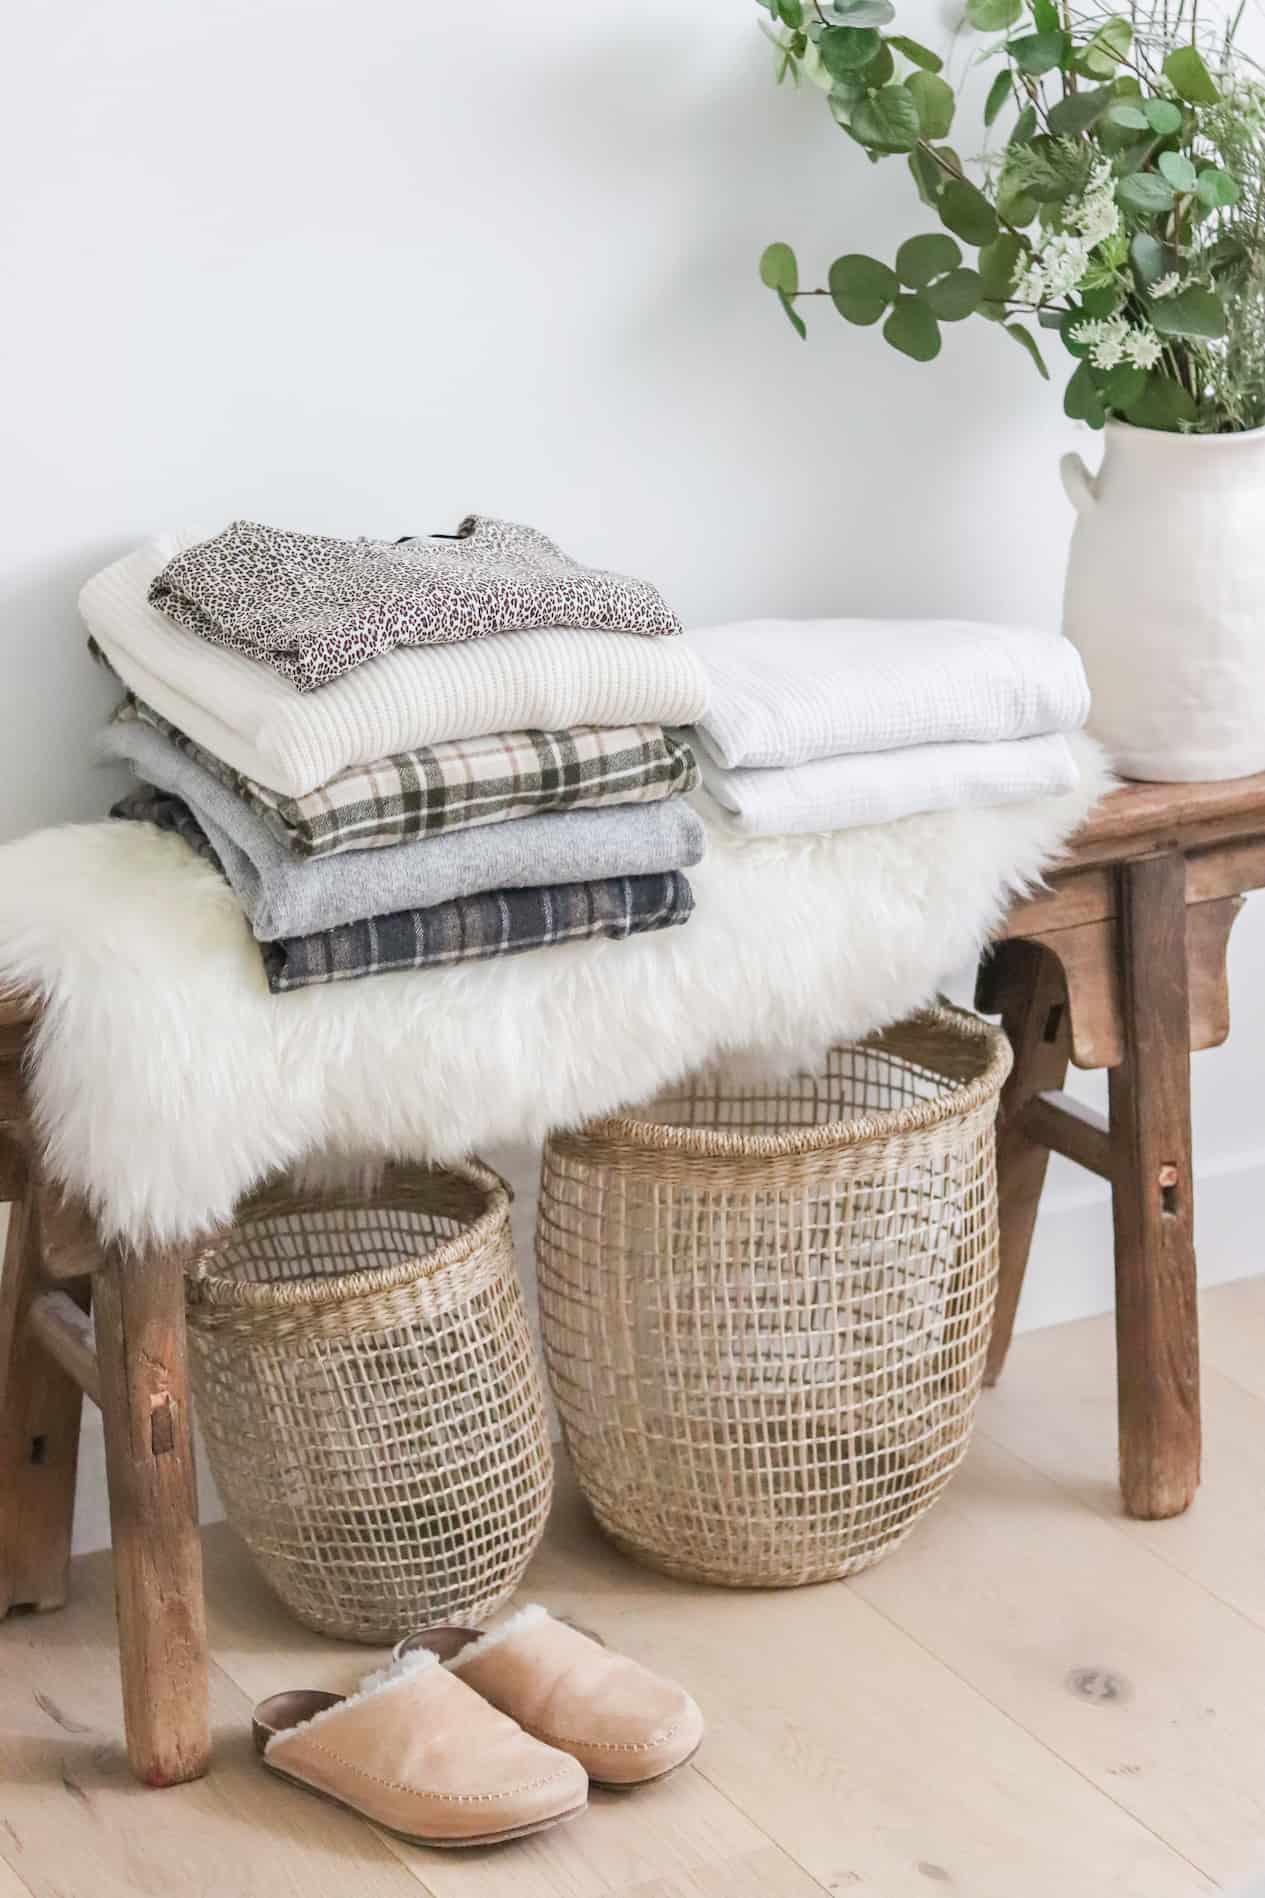 Clothing and slippers stacked on a wooden bench and faux fur.